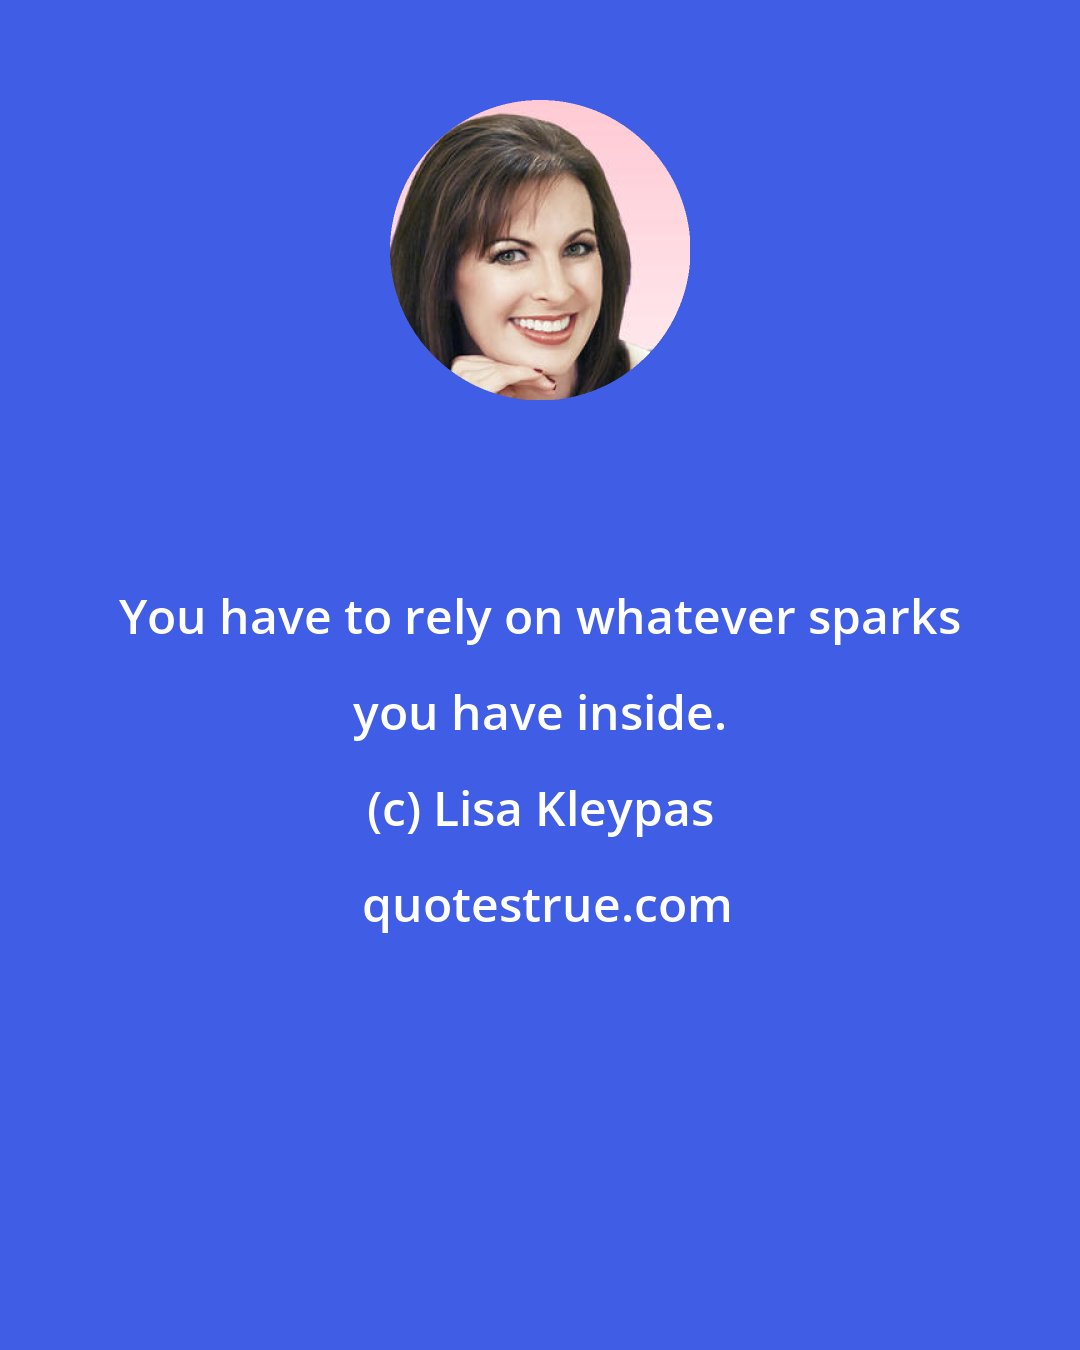 Lisa Kleypas: You have to rely on whatever sparks you have inside.